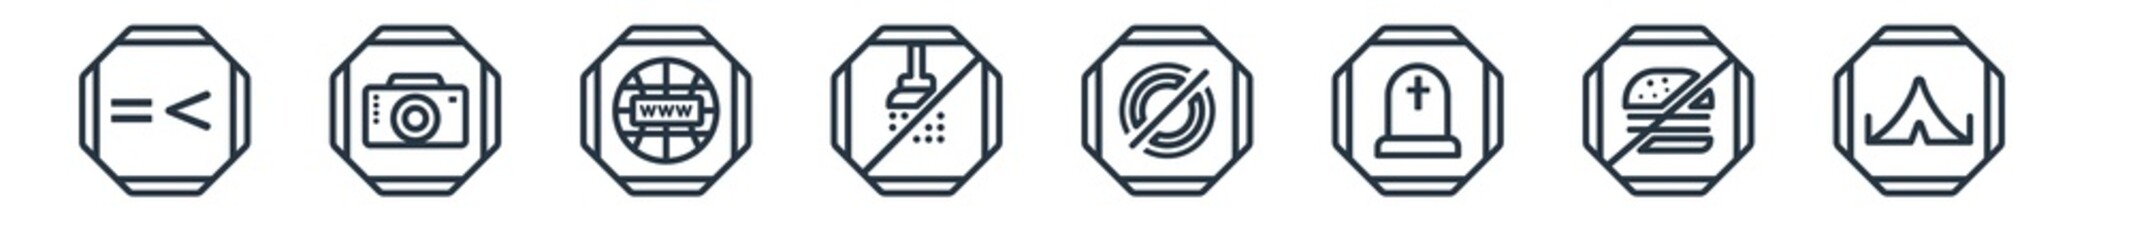 linear set of signs outline icons. line vector icons such as is less than or equal to, camera, internet, no shower, empty set, tent vector illustration.